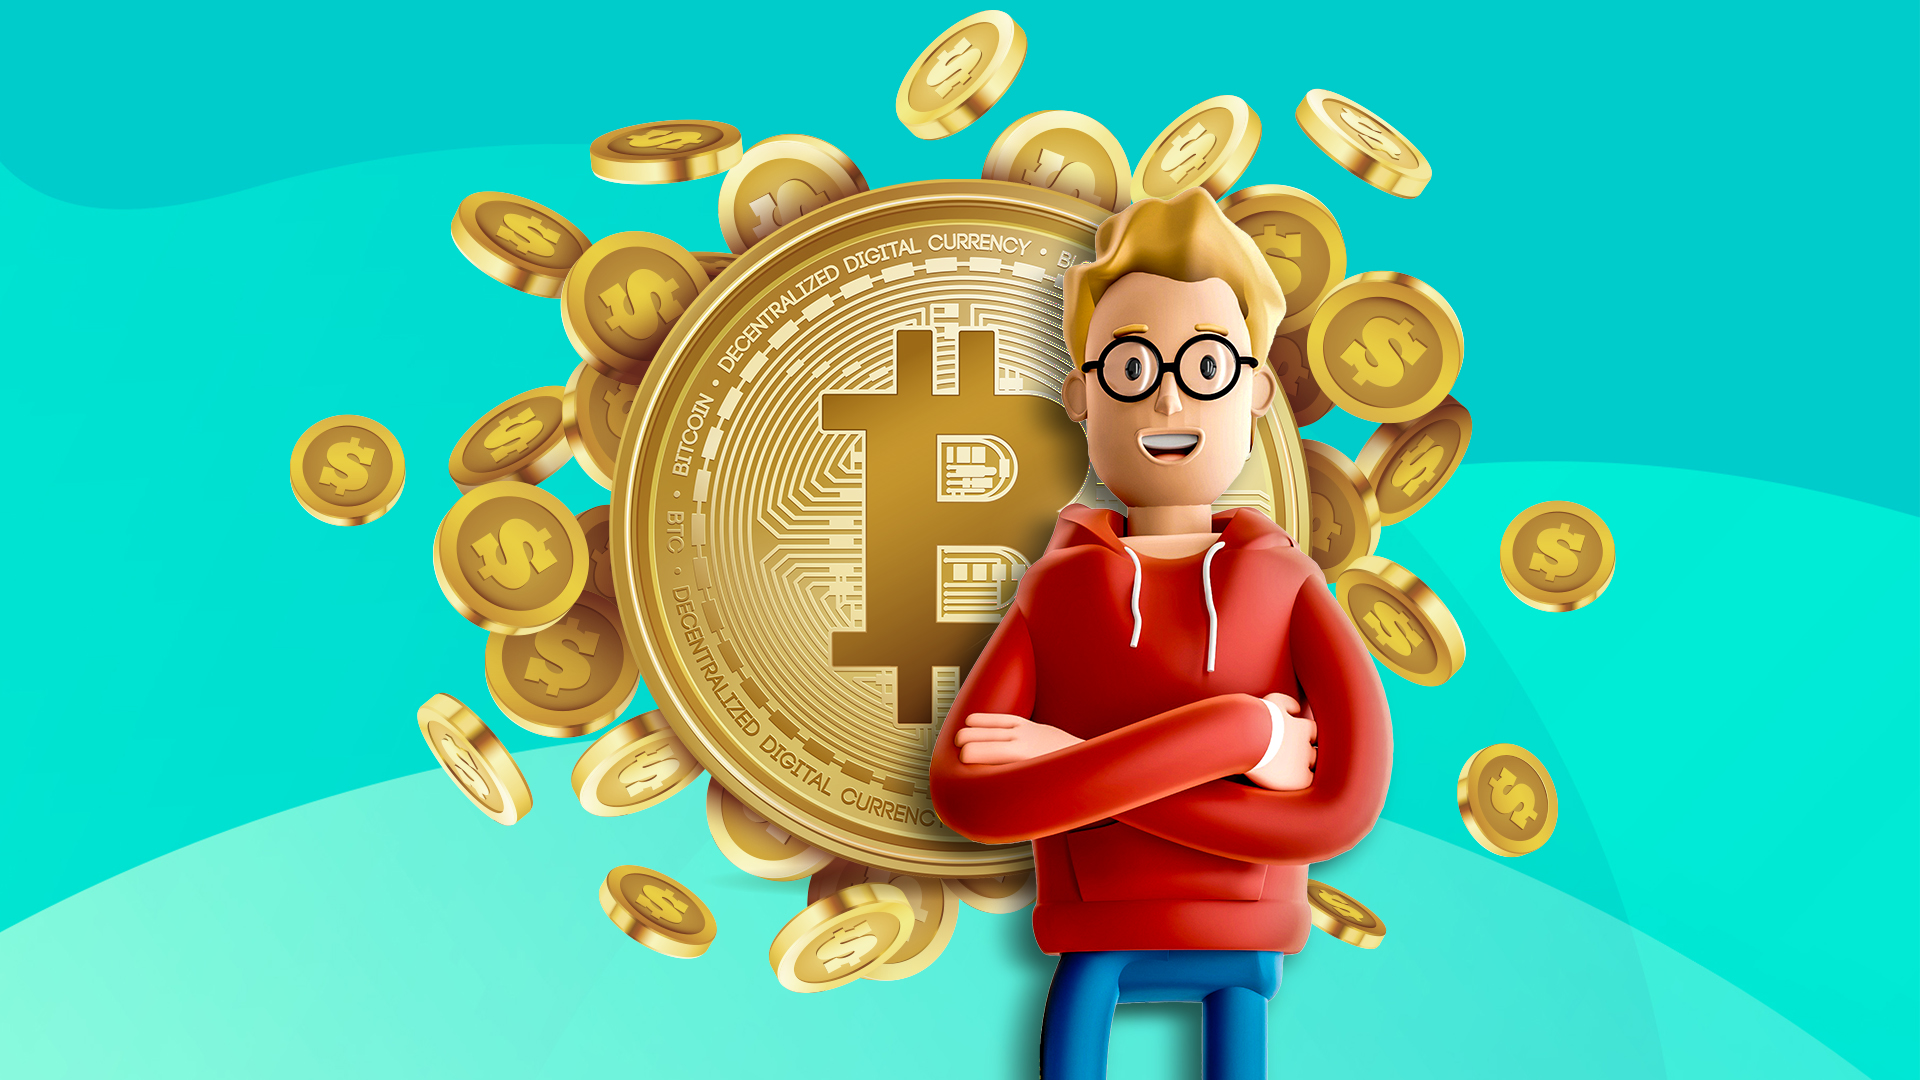 A cartoon man stands next to a giant Bitcoin coin, set against a teal background.